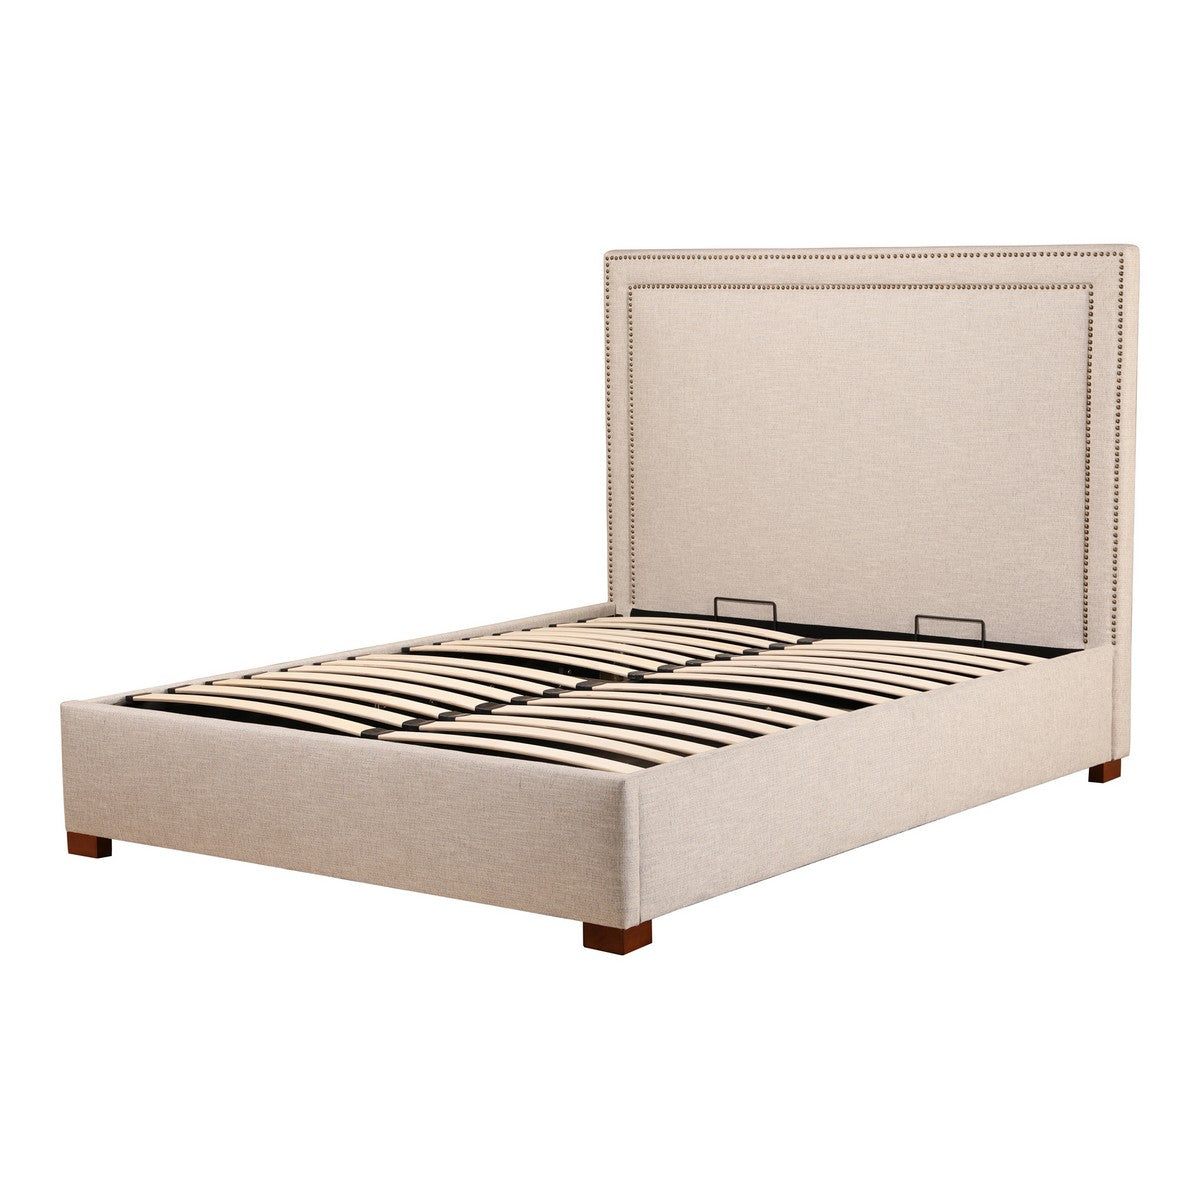 Moe's Home Collection Kenzo Storage Bed King Ecru - RN-1136-34